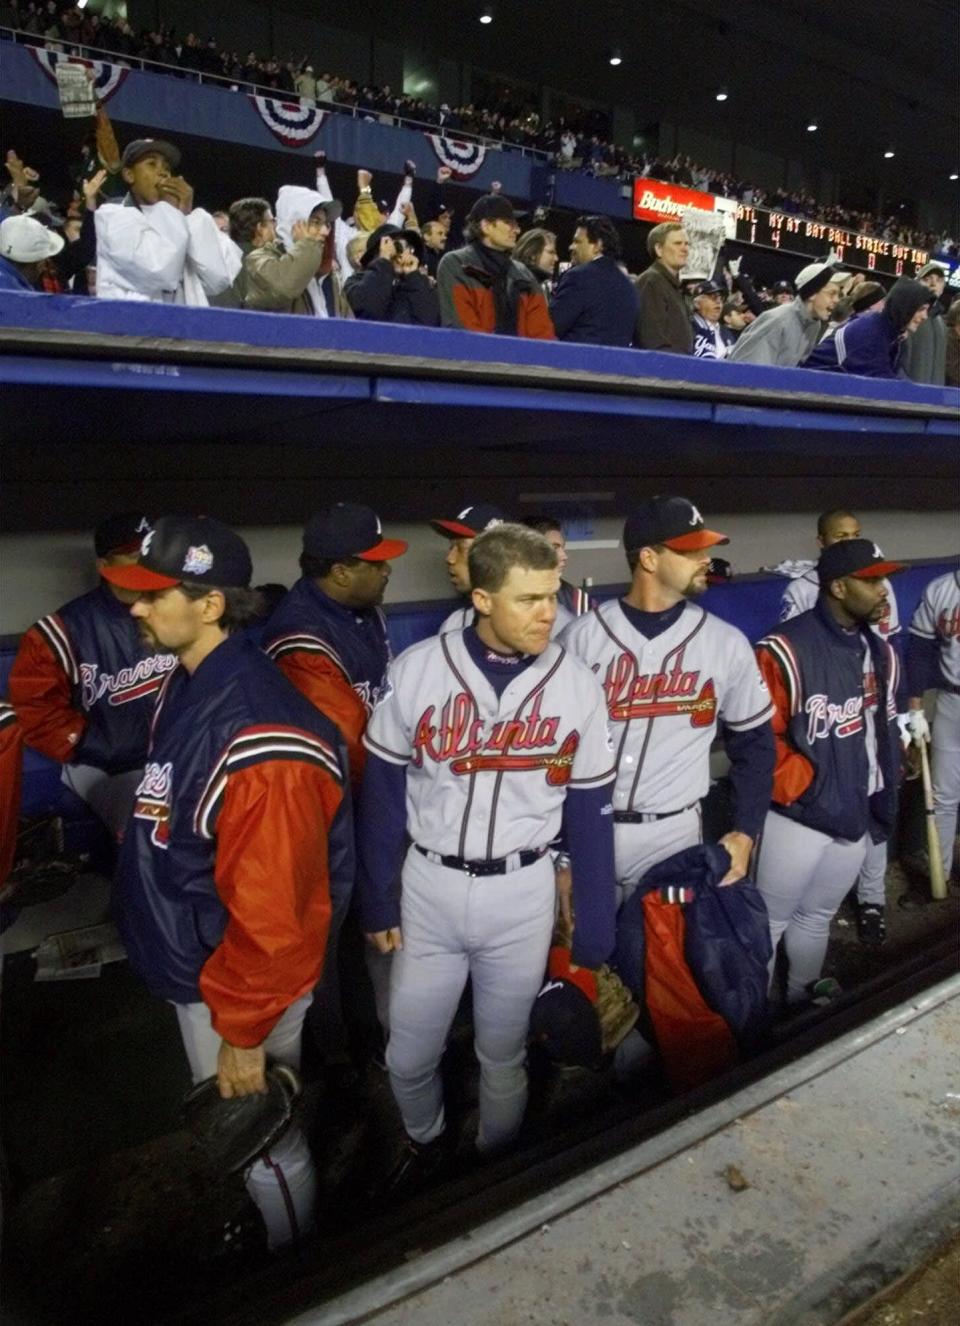 Braves players file out of the dugout after the Yankees won game 4 to sweep the World Series in 1999.